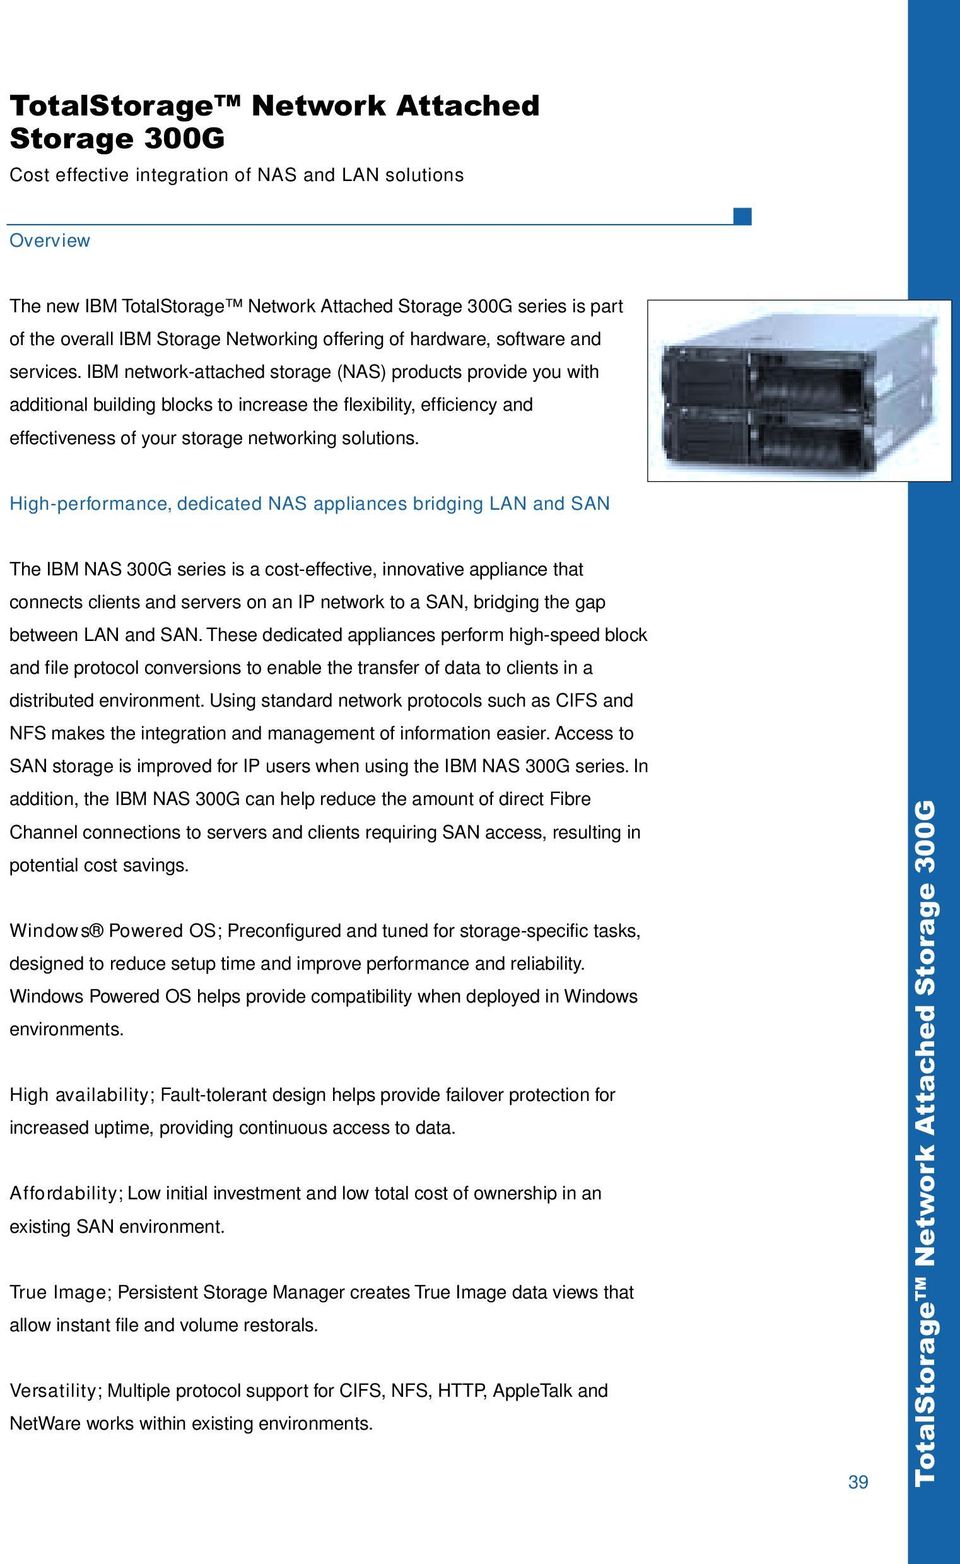 IBM network-attached storage (NAS) products provide you with additional building blocks to increase the flexibility, efficiency and effectiveness of your storage networking solutions.